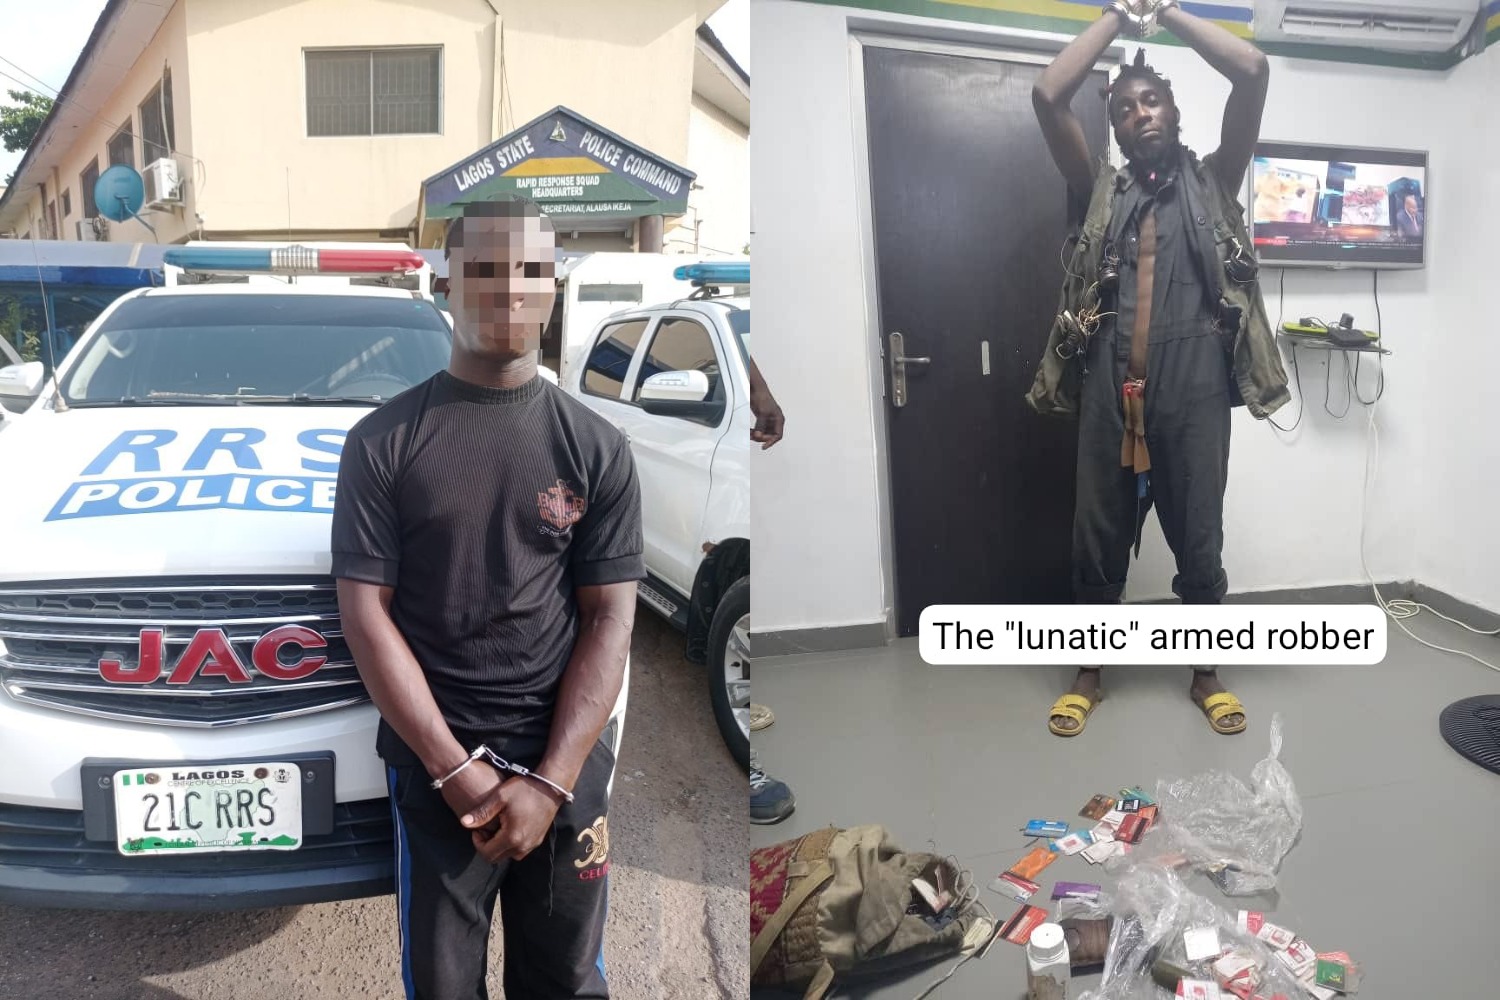 Police arrest kidnapper disguised as lunatic